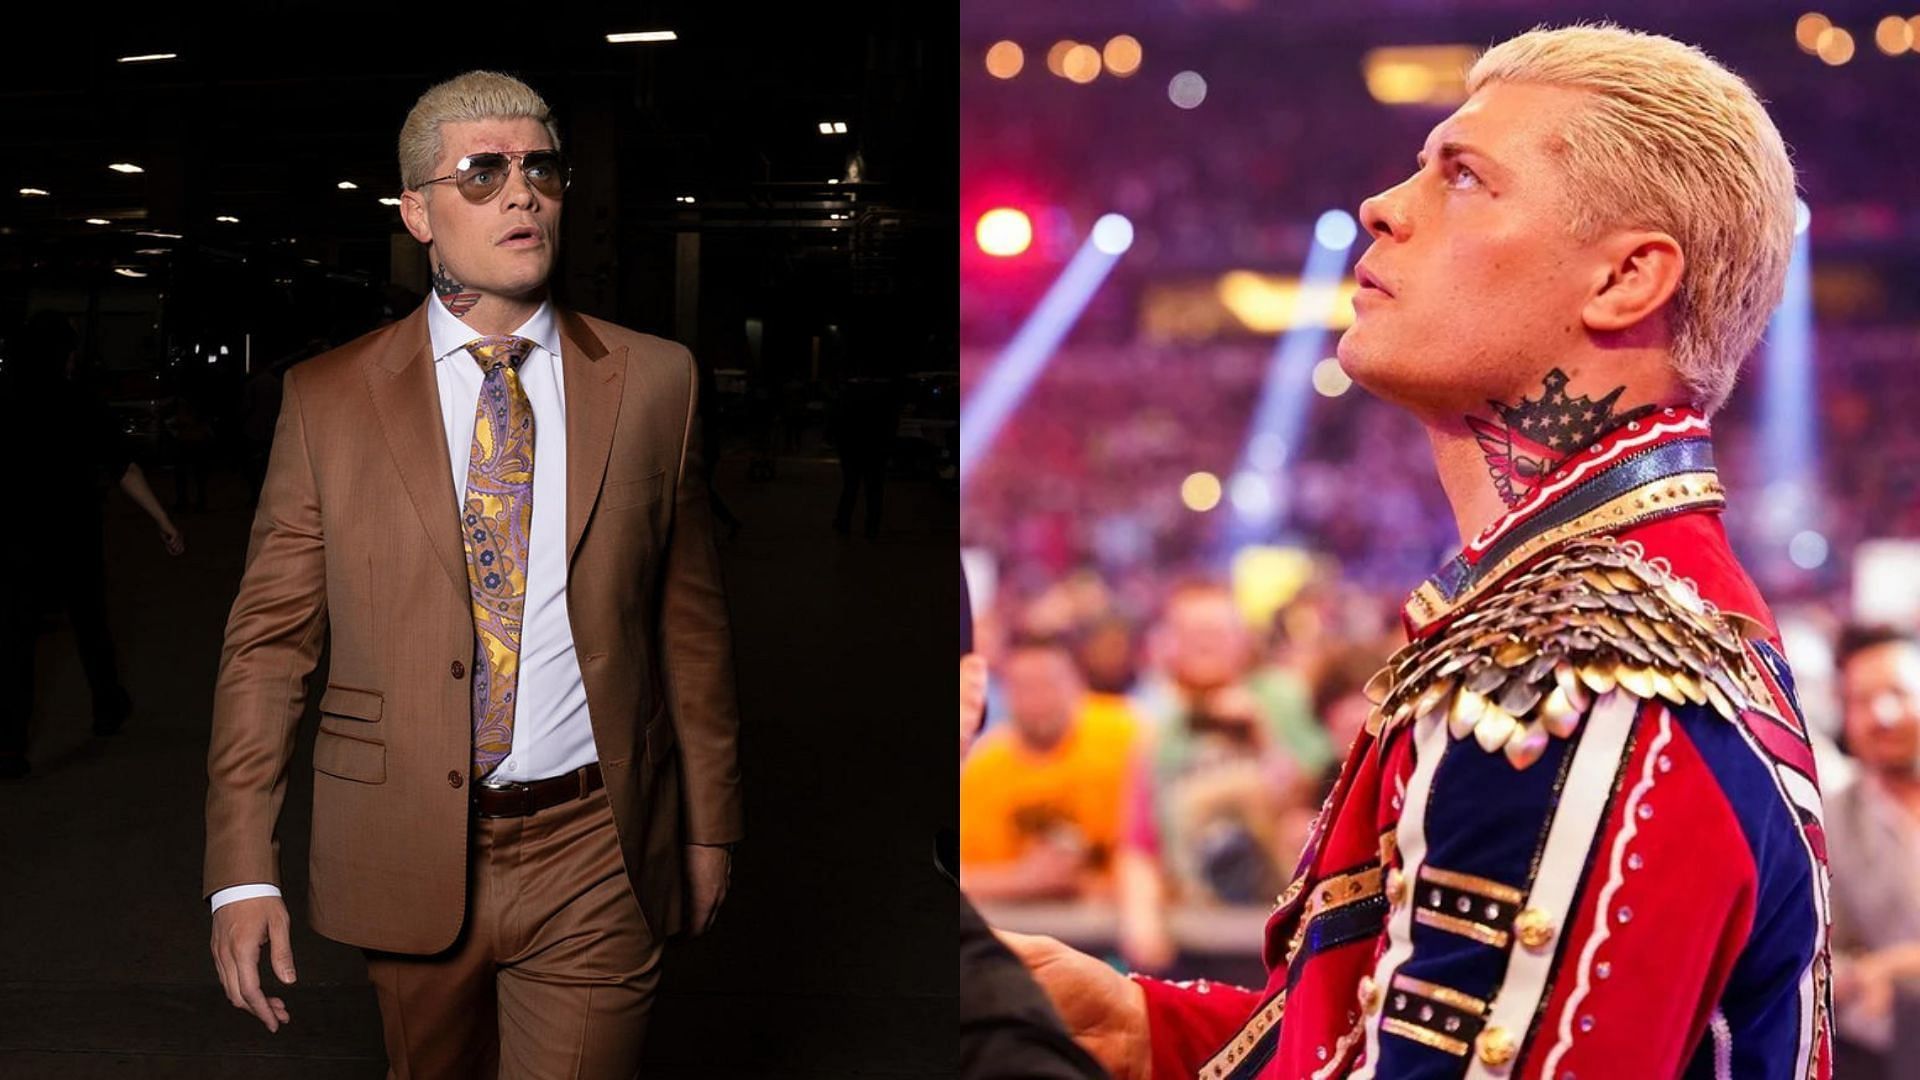 Cody Rhodes is scheduled to compete in the 2023 Royal Rumble match